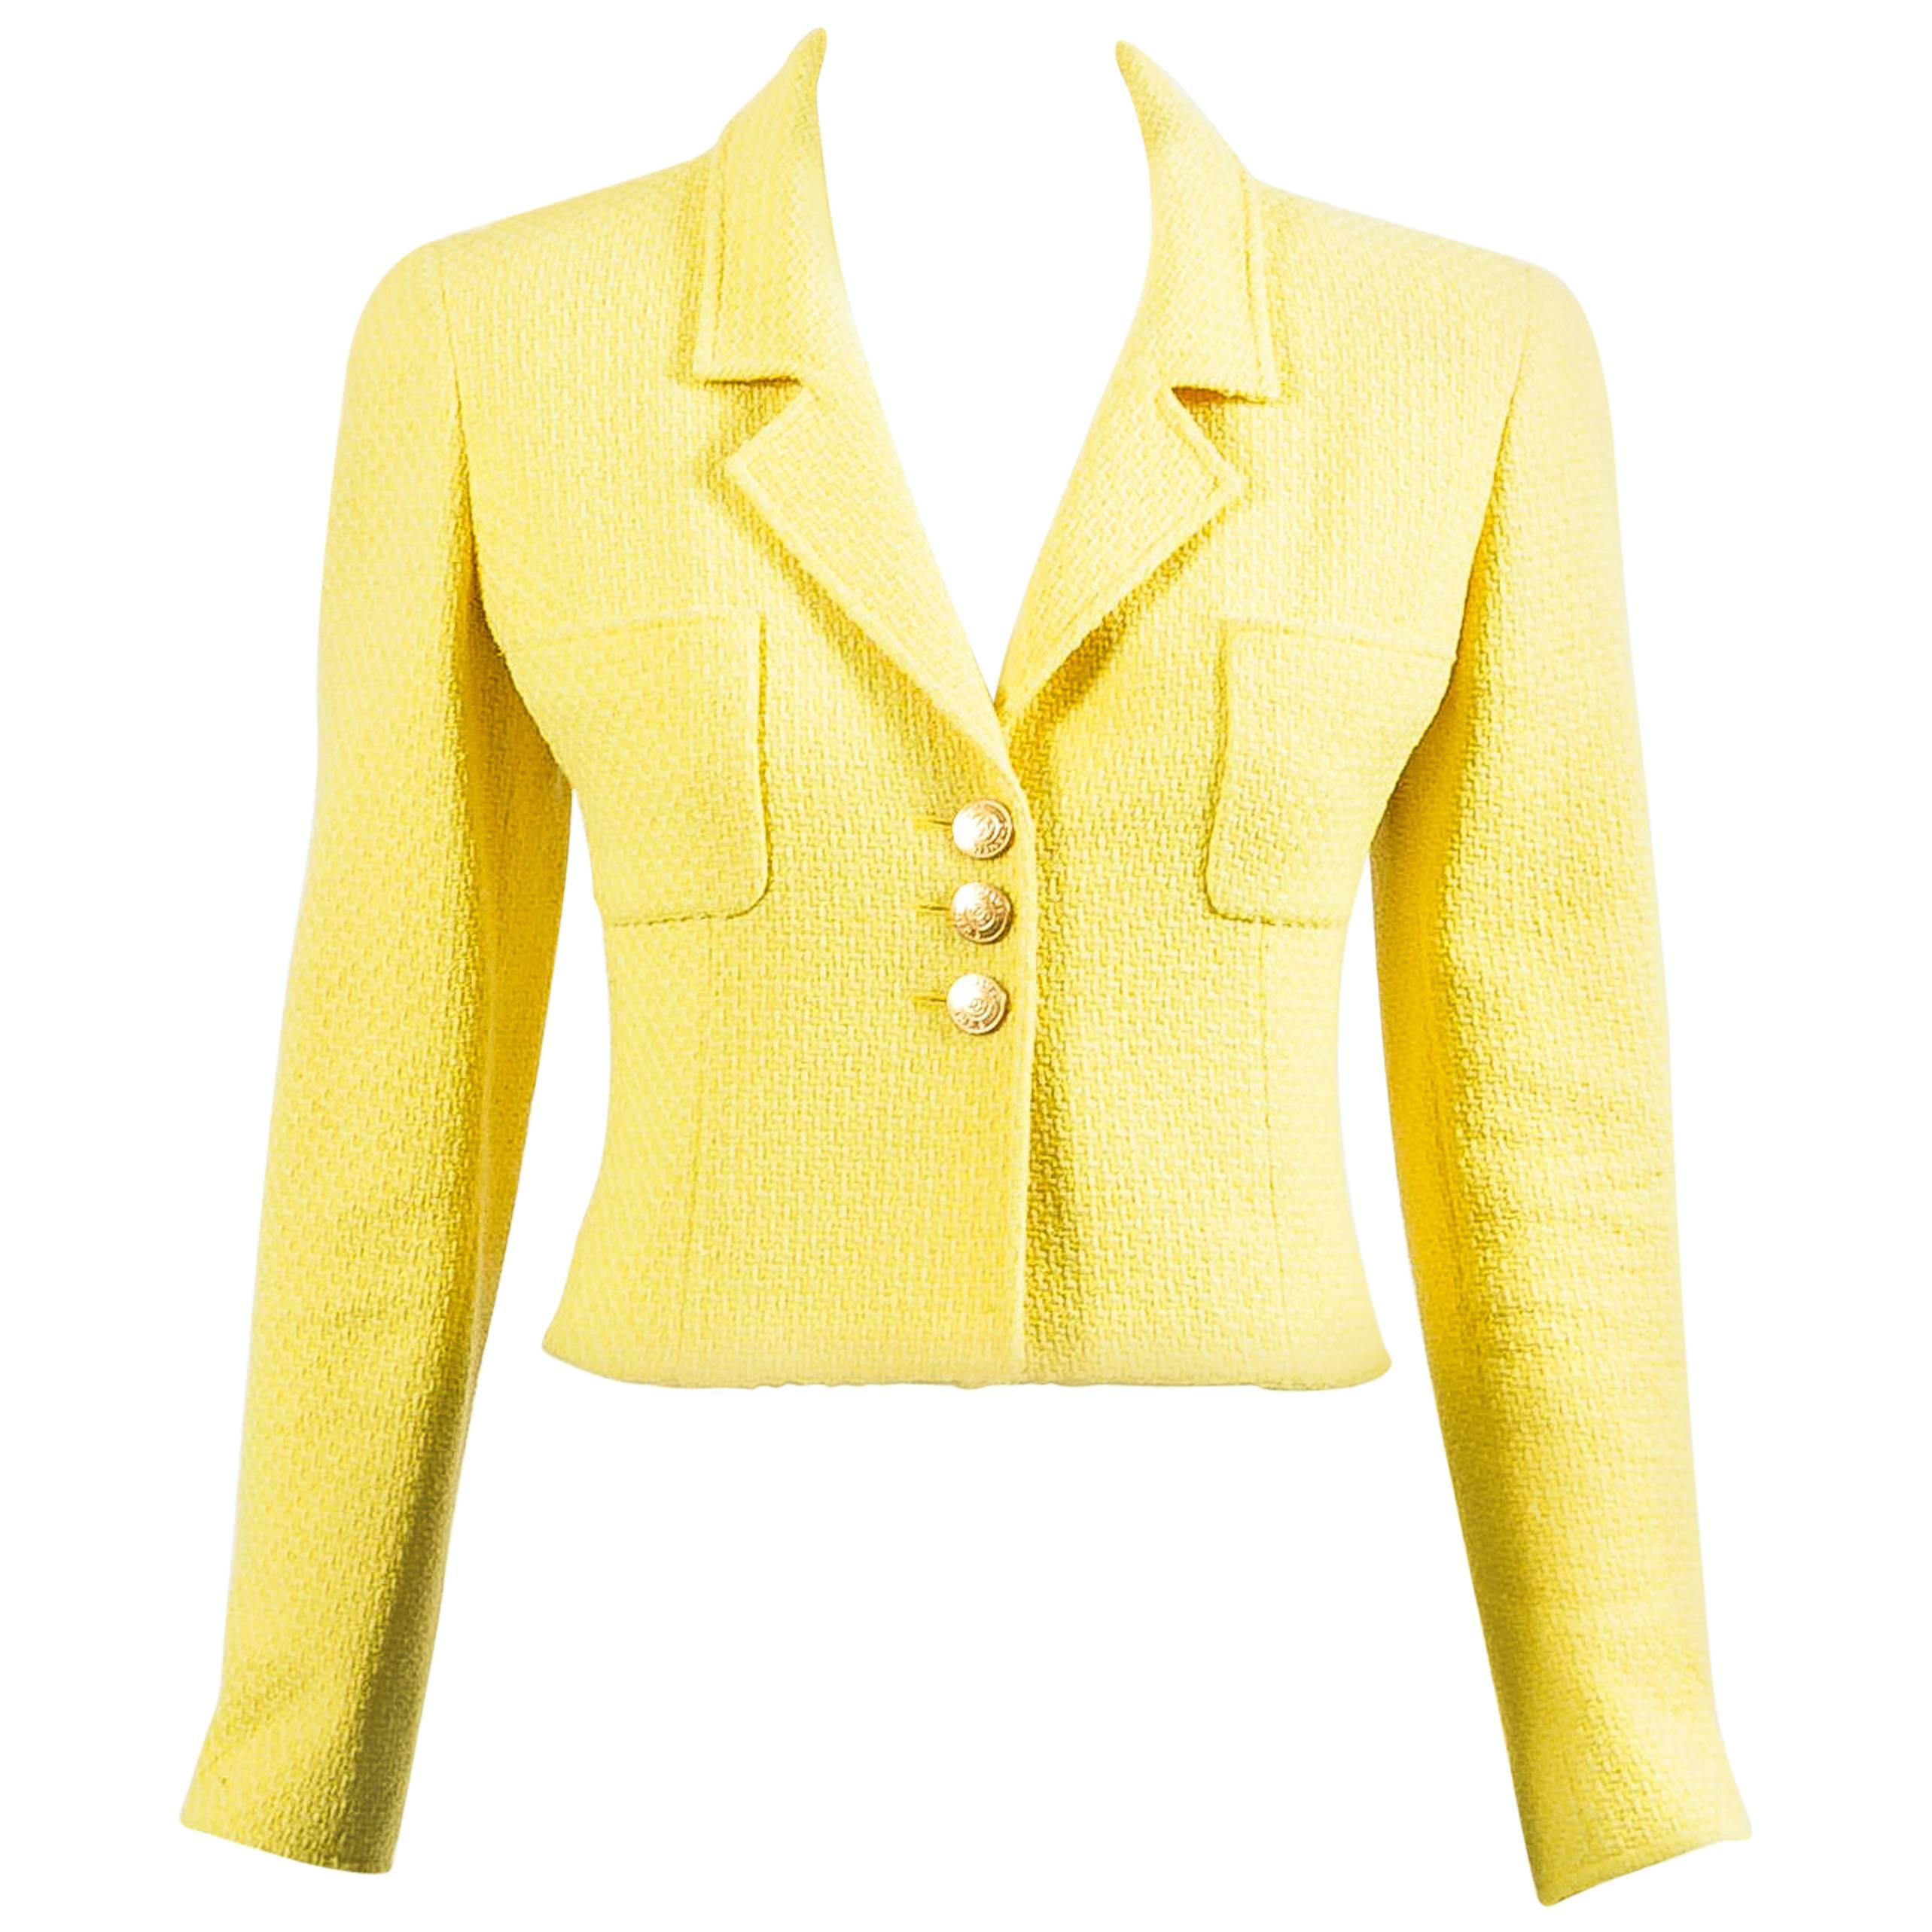 Vintage Chanel Boutique Yellow Tweed 'CC' Button Cropped Structured Jacket For Sale